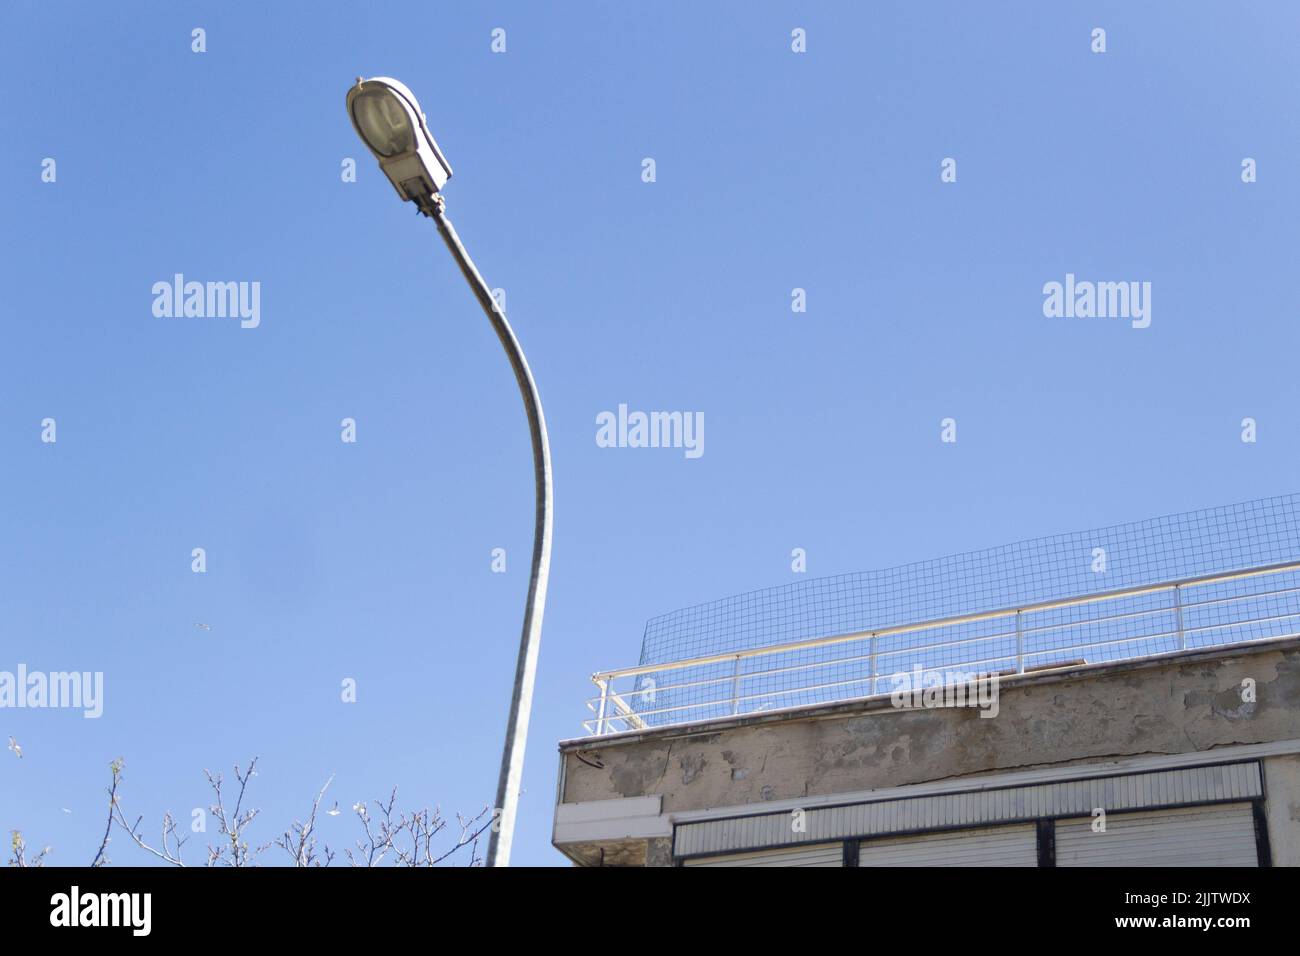 An electric lighting pole against the cloudless sky Stock Photo